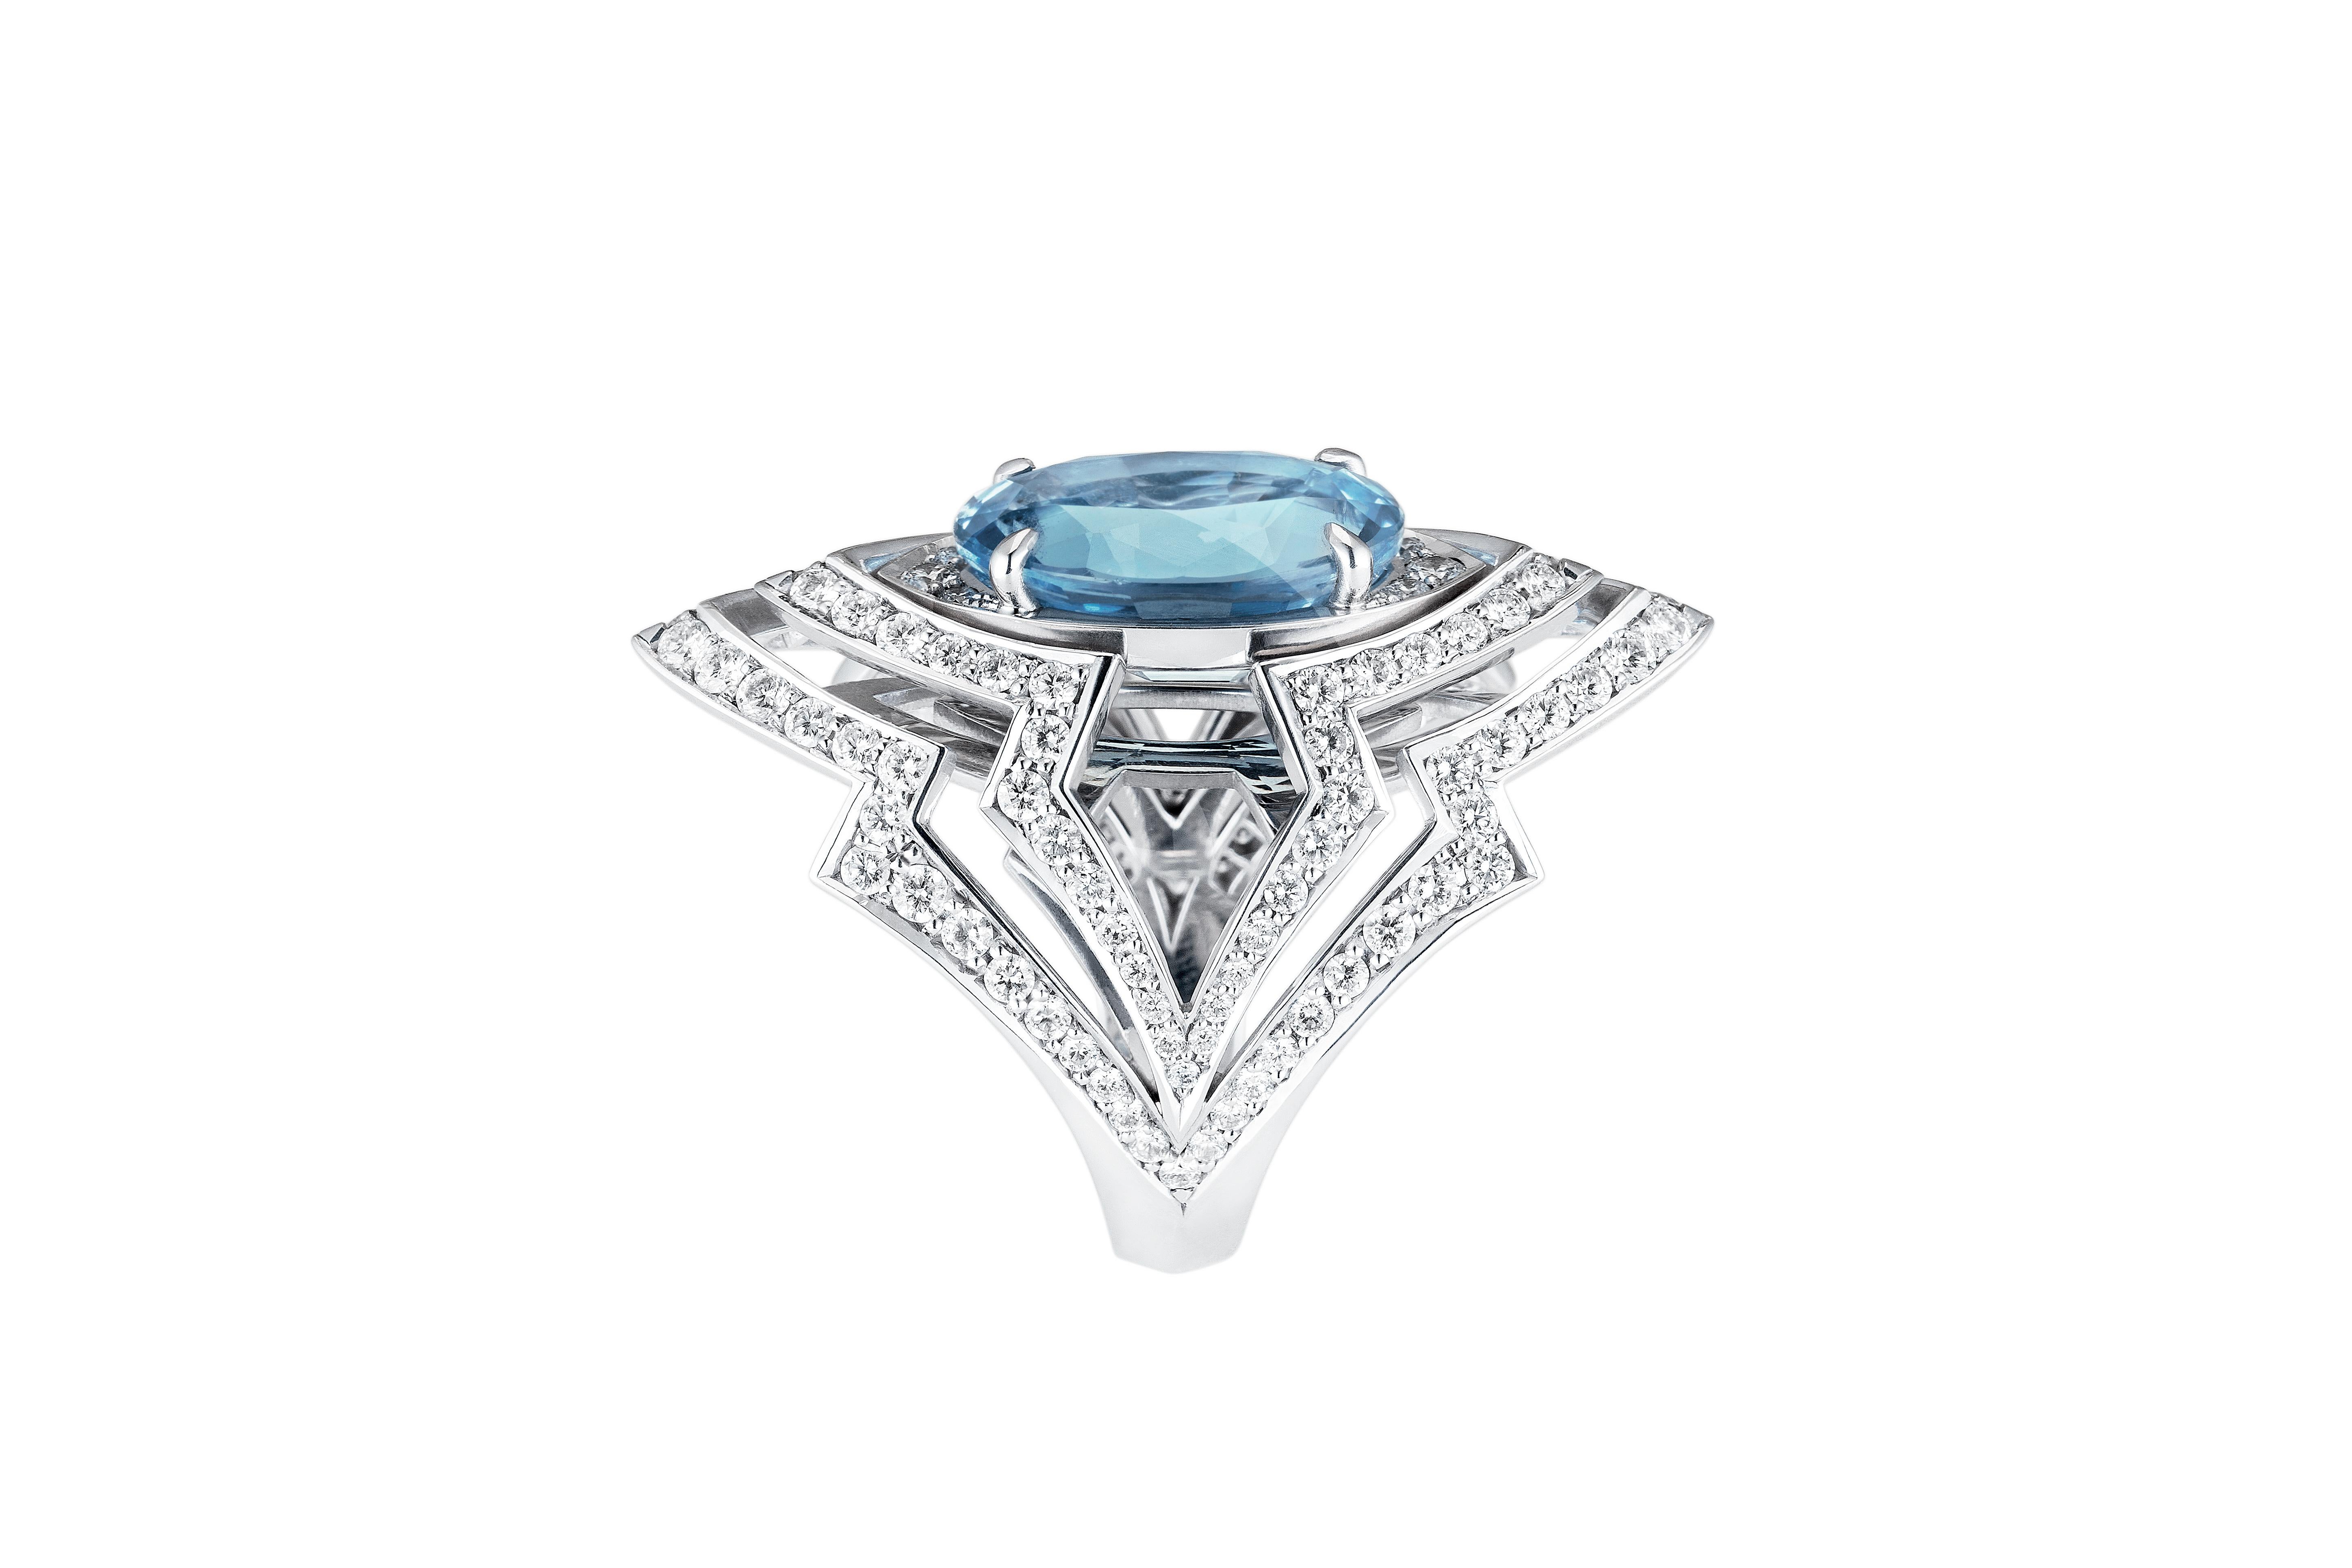 This iconic Stephen Webster Lady Stardust Couture Ring takes inspiration from David Bowie and his legendary alter ego; Ziggy Stardust. Handcrafted in 18 karat white gold, with white diamond pavé and a central oval cut aquamarine (6.51